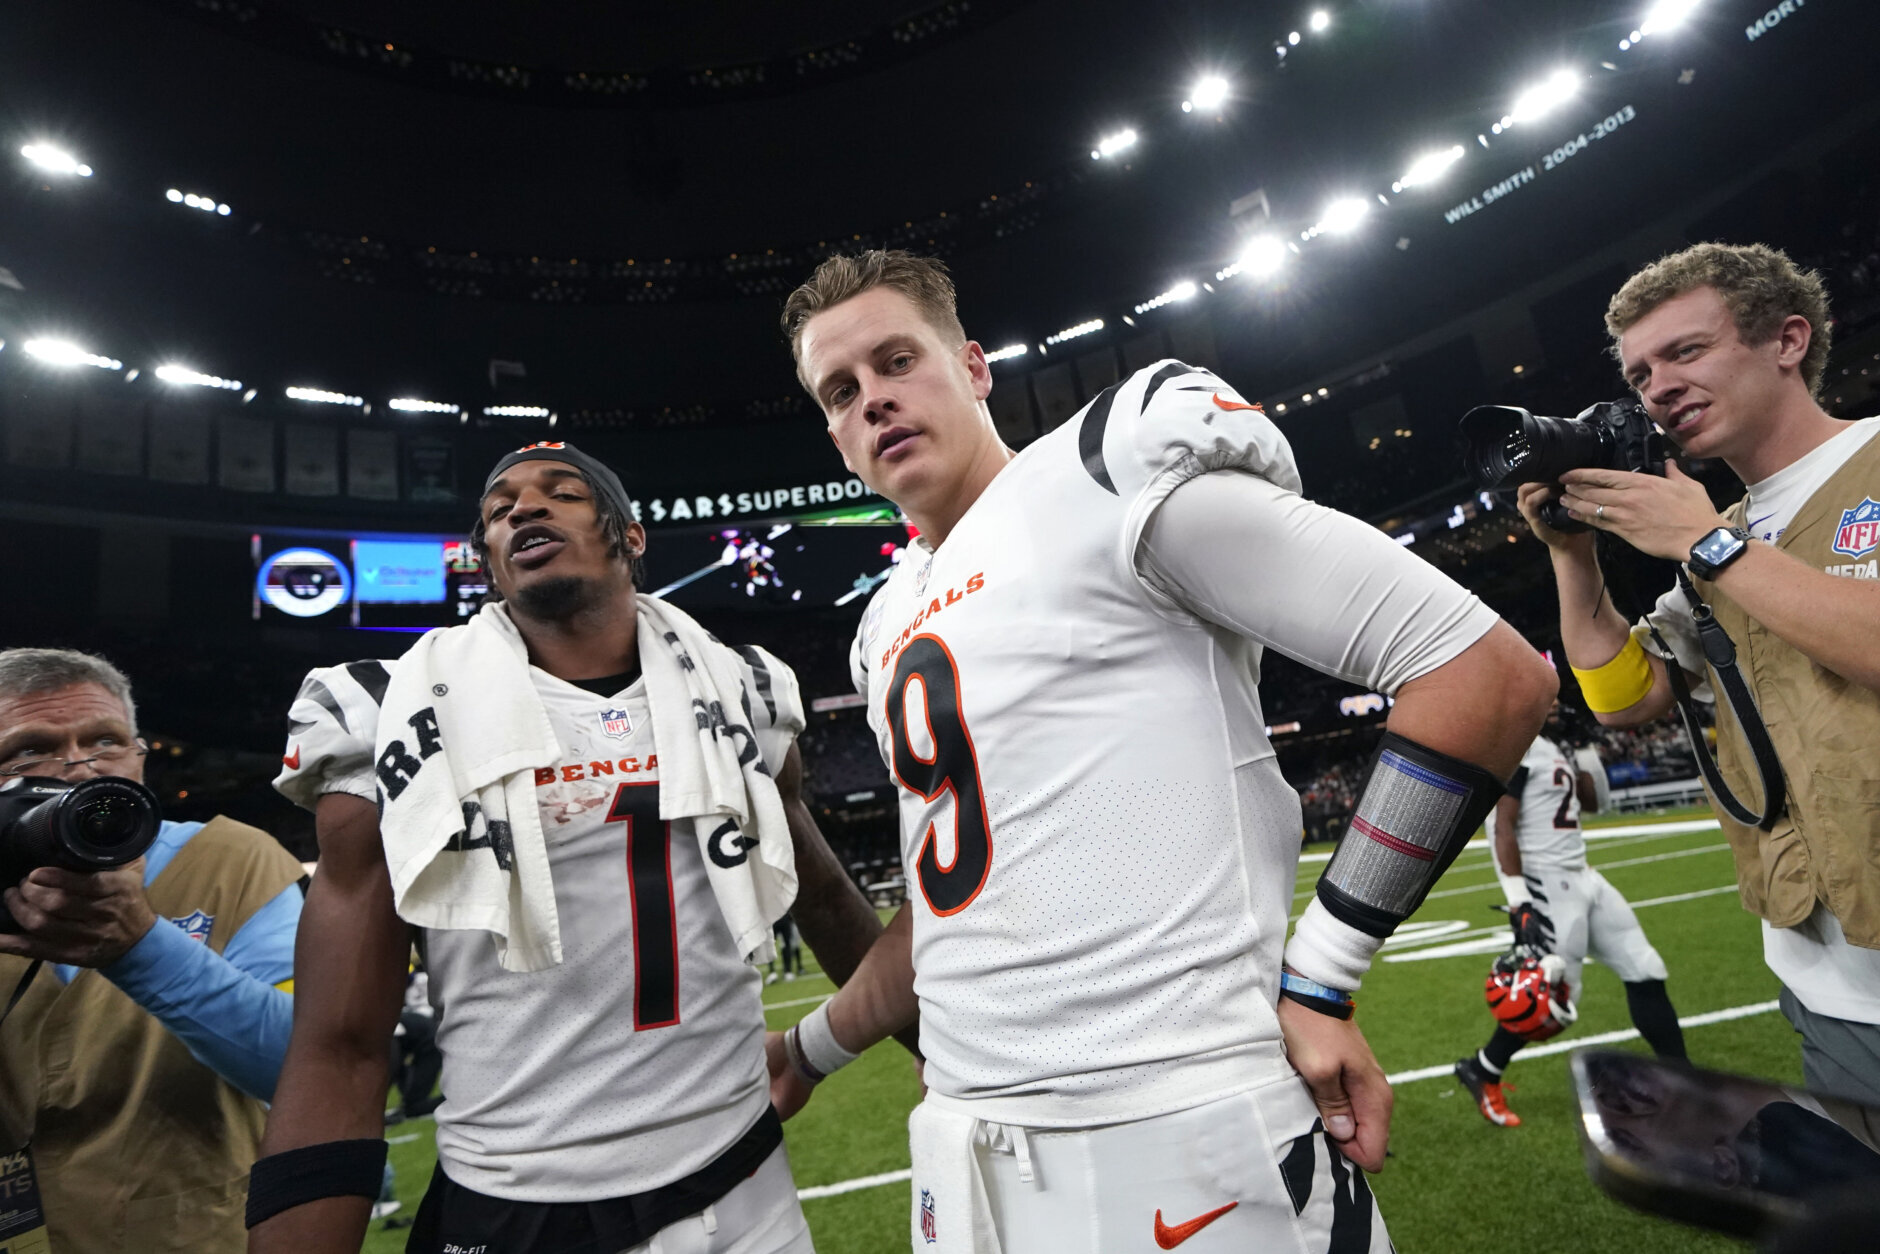 <p><b><i>Bengals 30</i></b><br />
<b><i>Saints 26</i></b></p>
<p>Of course the Bayou Boys (former LSU greats Joe Burrow and Ja&#8217;Marr Chase) teamed up to hand former Bengal Andy Dalton the &#8216;L&#8217; that could cost him <a href="https://profootballtalk.nbcsports.com/2022/10/16/report-opportunity-for-andy-dalton-to-remain-saints-starter/" target="_blank" rel="noopener" data-saferedirecturl="https://www.google.com/url?q=https://profootballtalk.nbcsports.com/2022/10/16/report-opportunity-for-andy-dalton-to-remain-saints-starter/&amp;source=gmail&amp;ust=1666046055090000&amp;usg=AOvVaw2rN1qr18X9mCwjM1HnUg7j">his last, best chance to be a starting QB</a>.</p>
